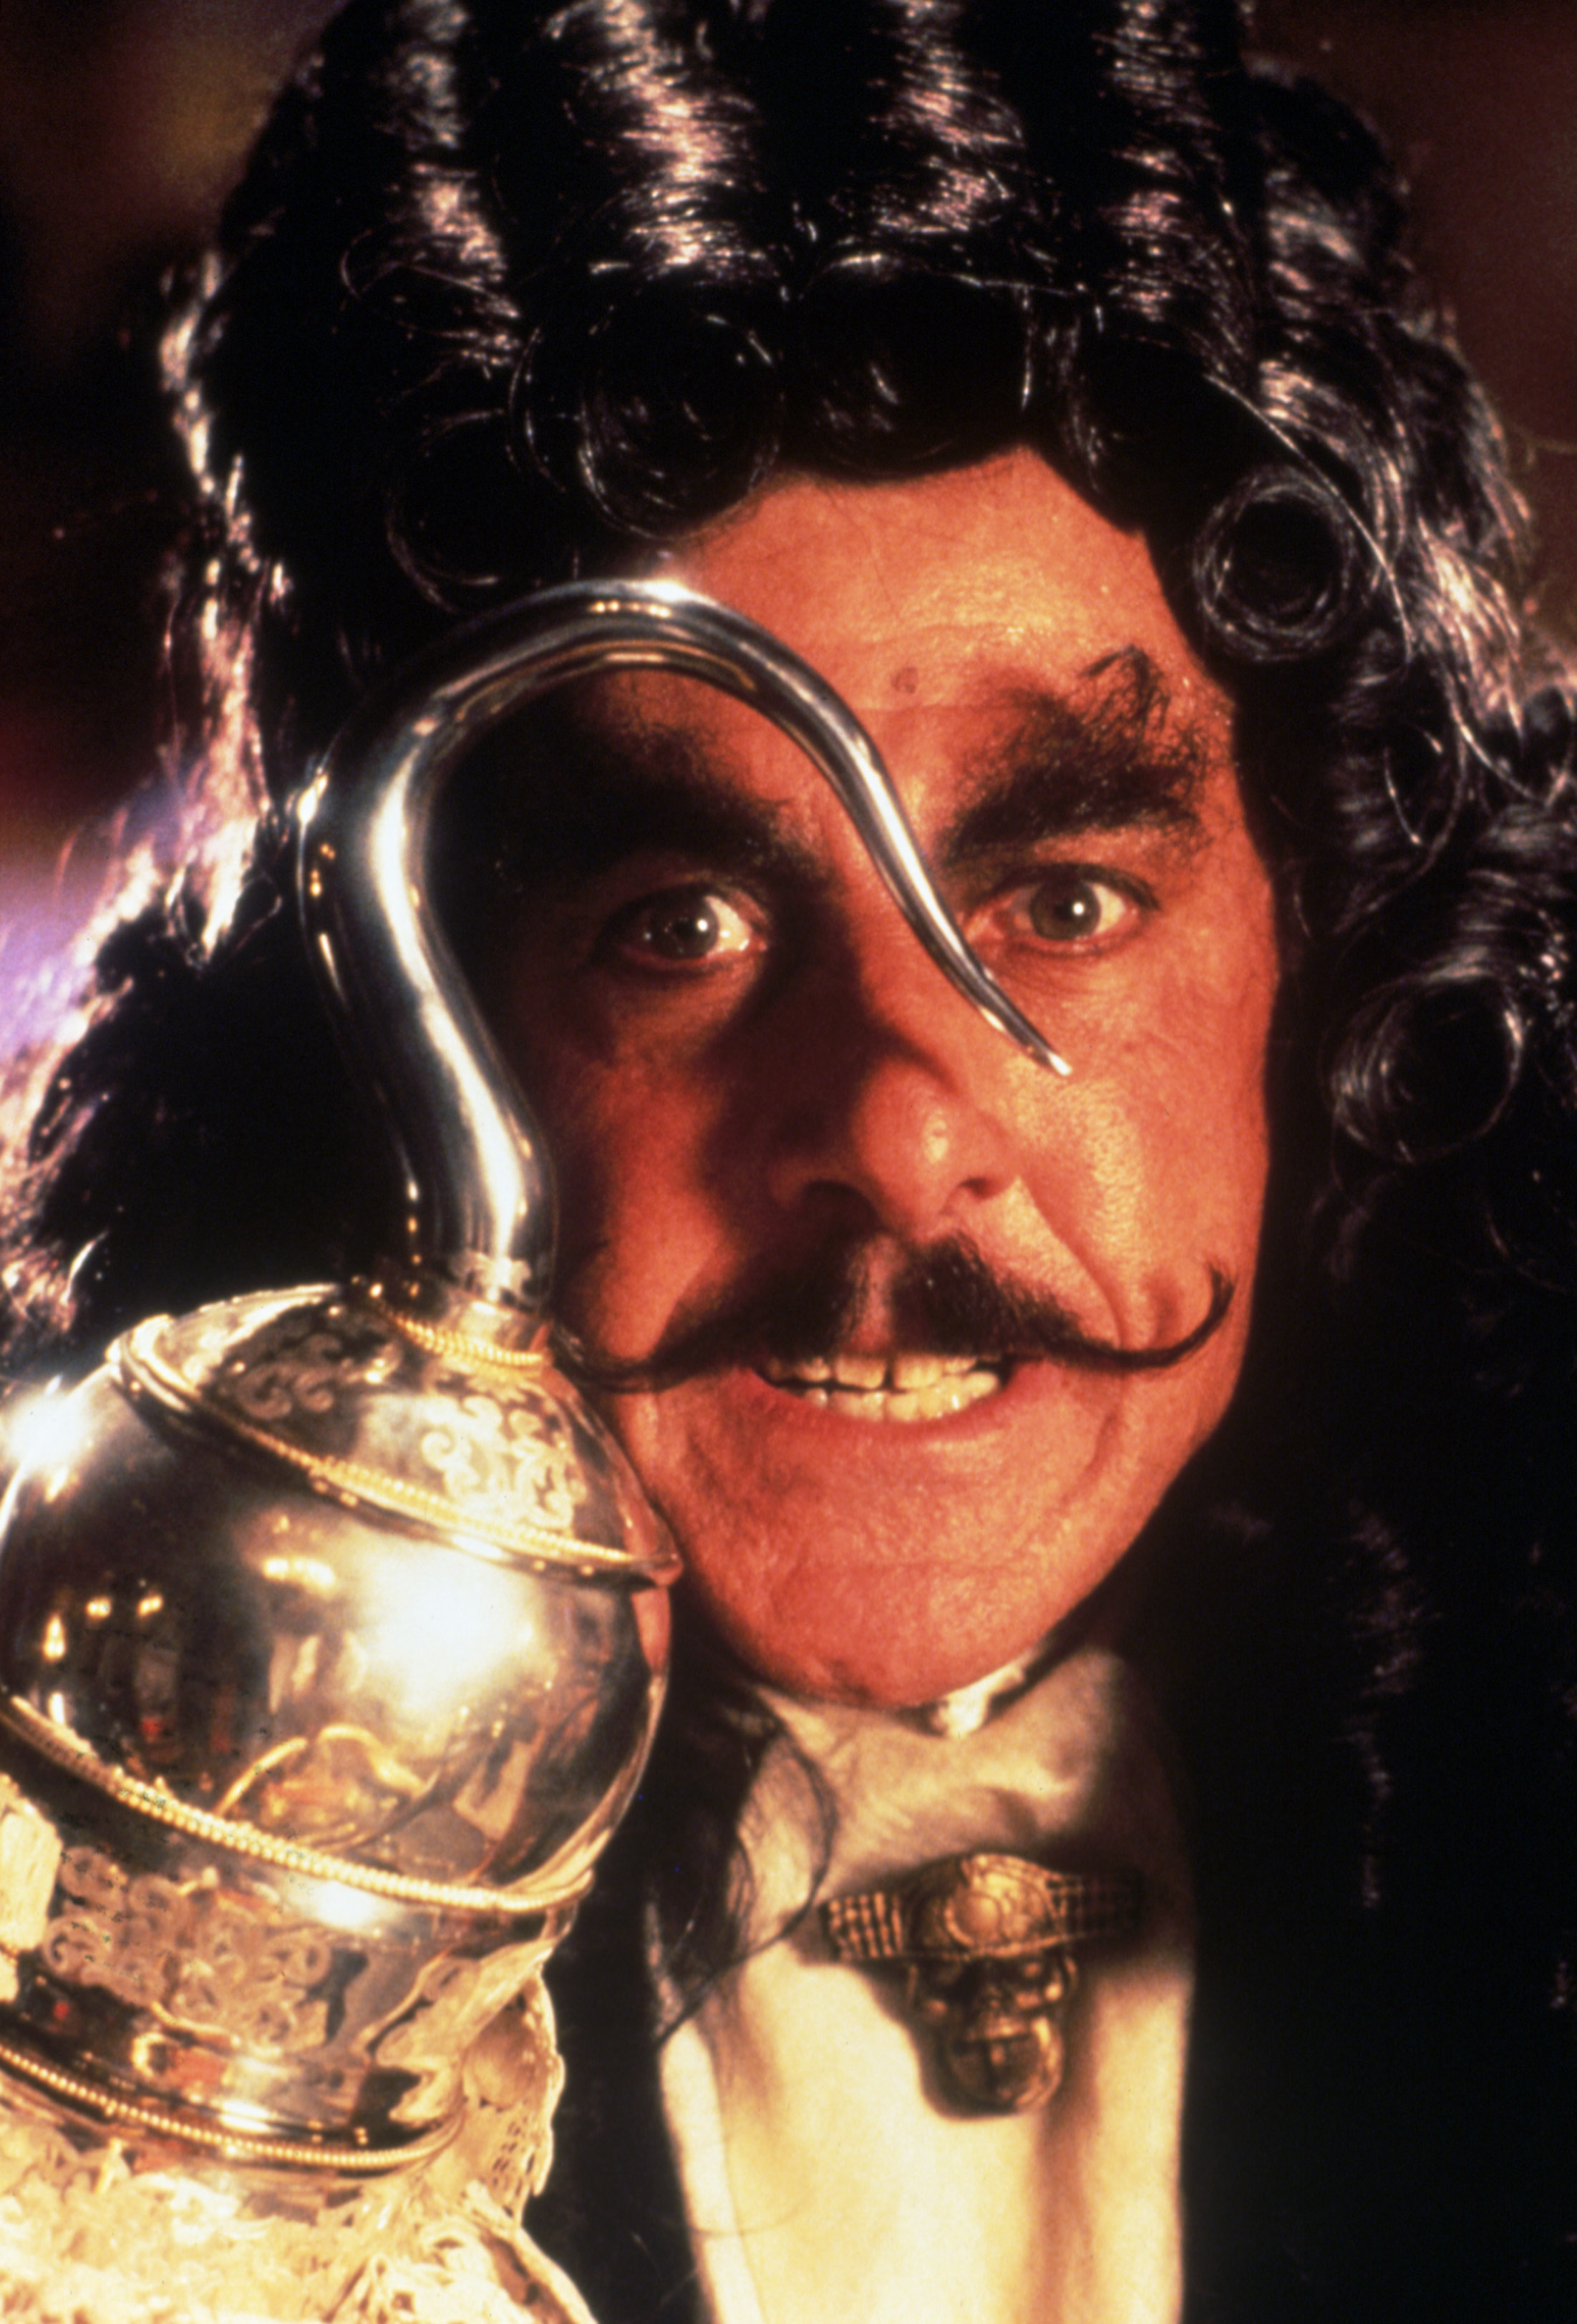 Hook' 30th anniversary: See who's played Captain Hook over the decades, Gallery